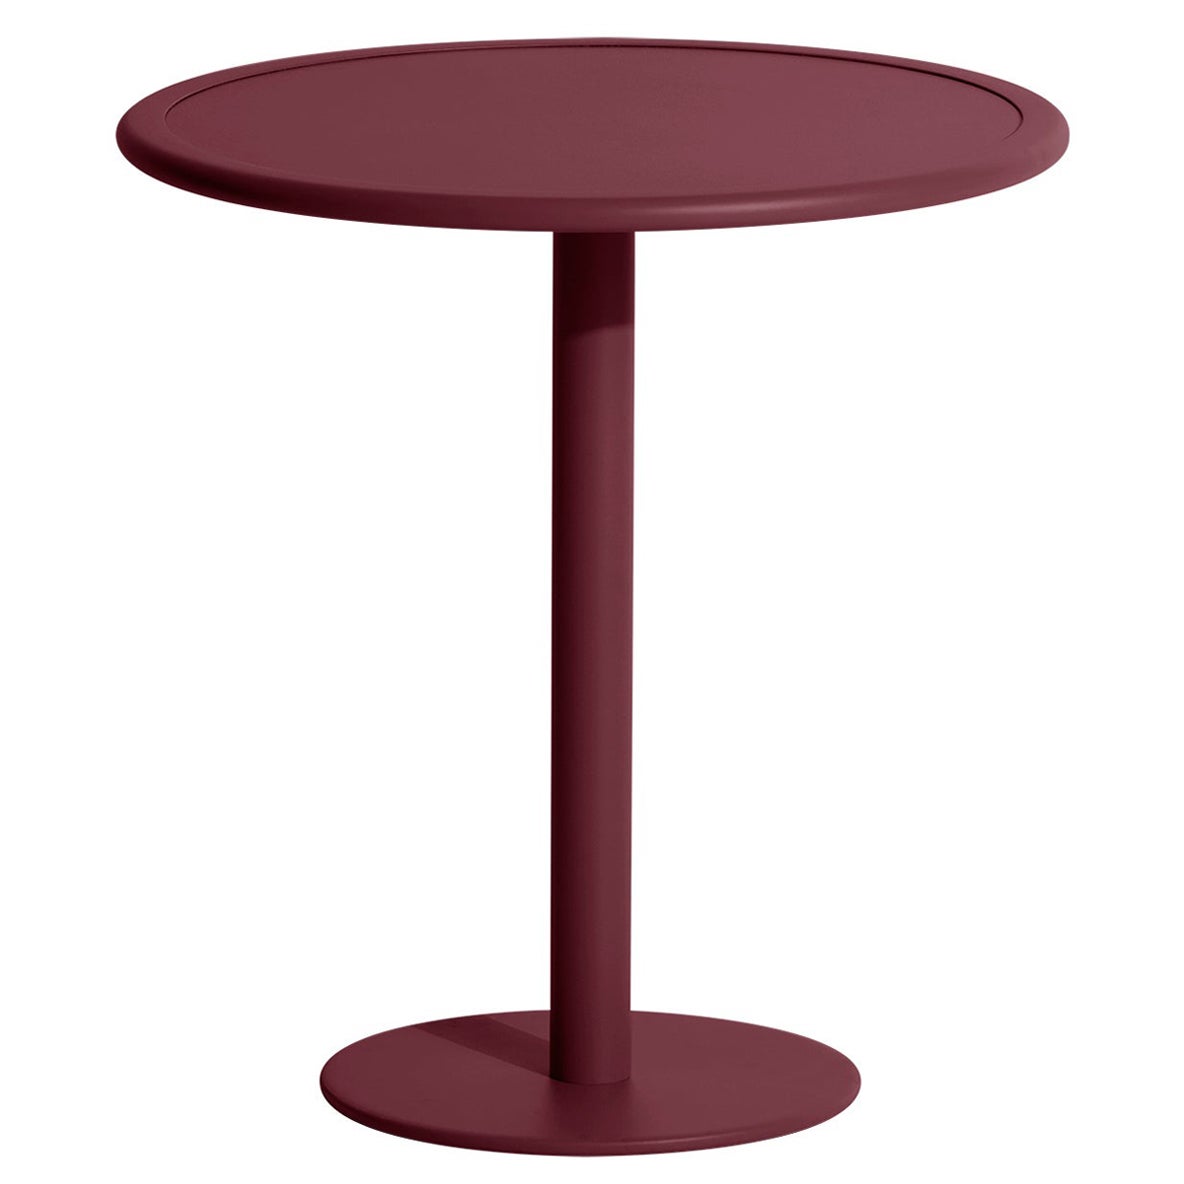 Petite Friture Week-End Bistro Round Dining Table in Burgundy Aluminium, 2017